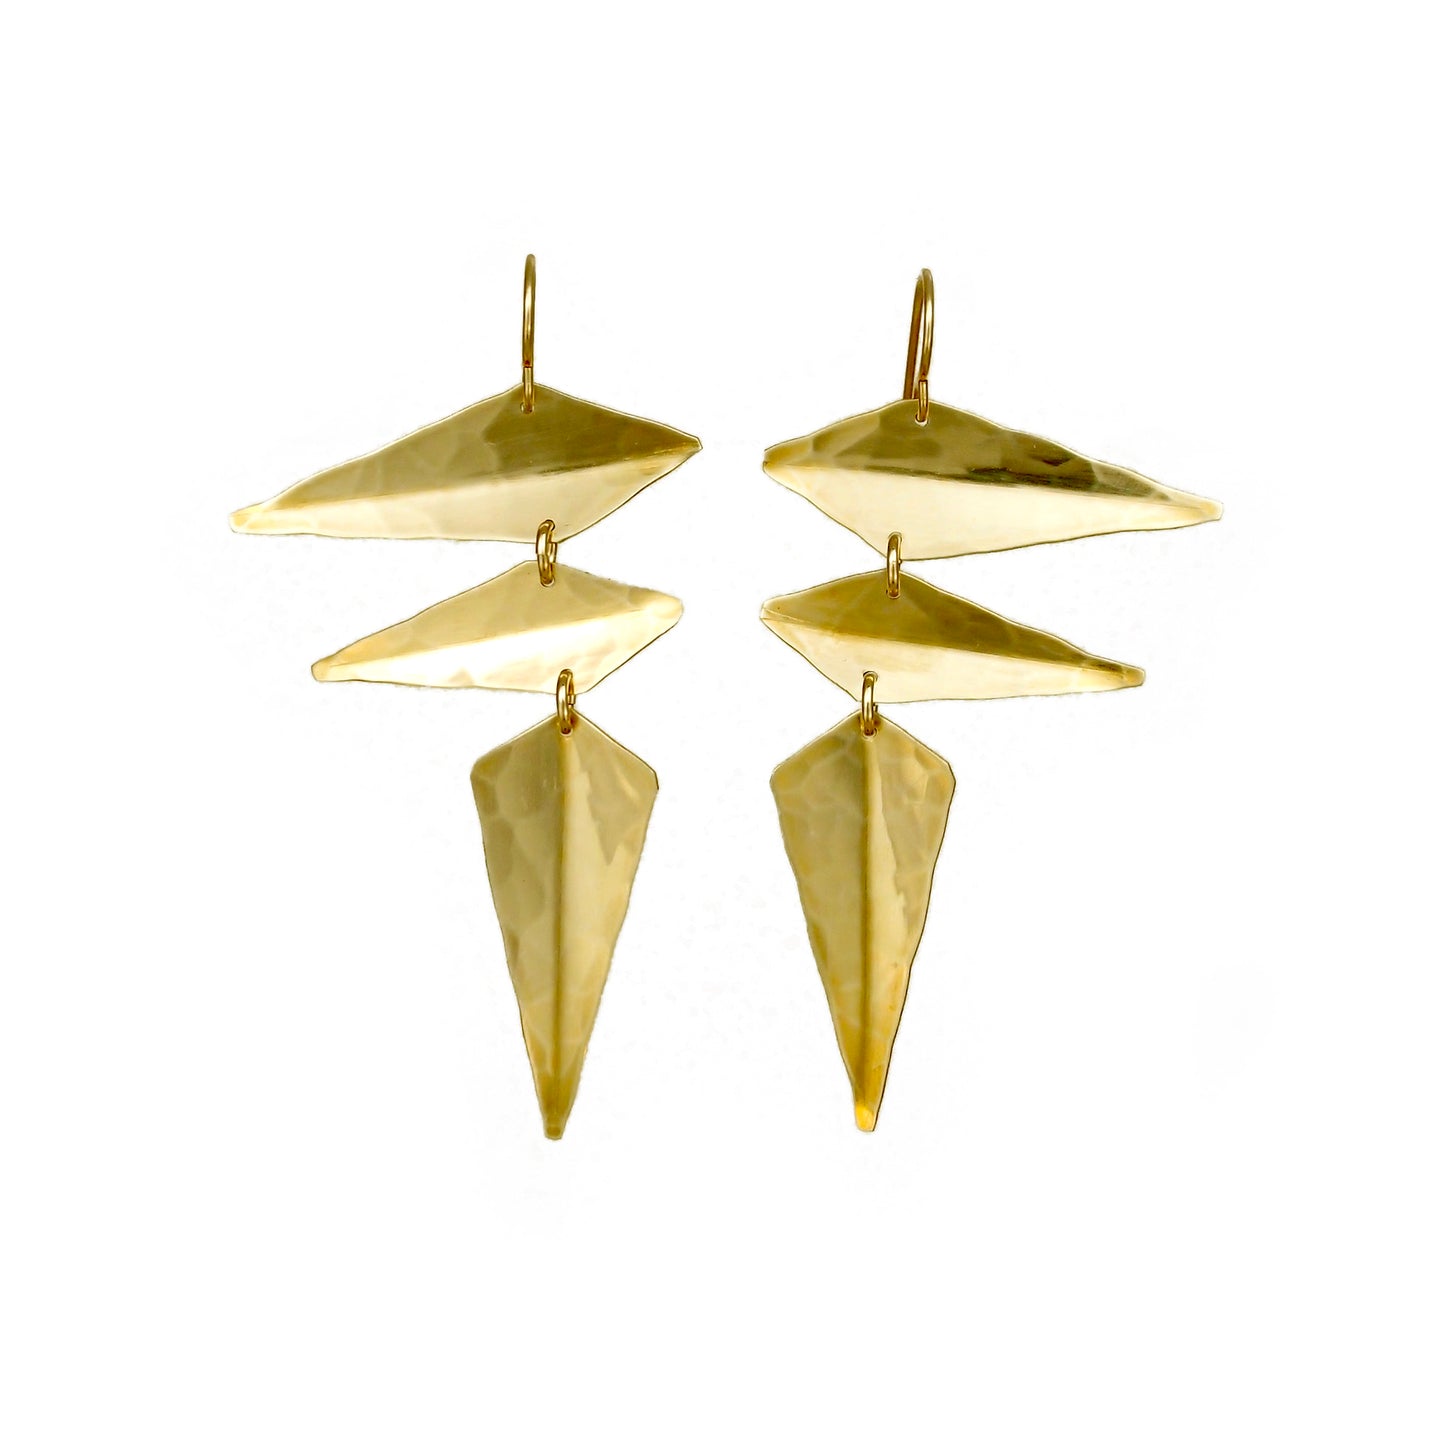 Gold earrings made from angular hammered metal shapes.